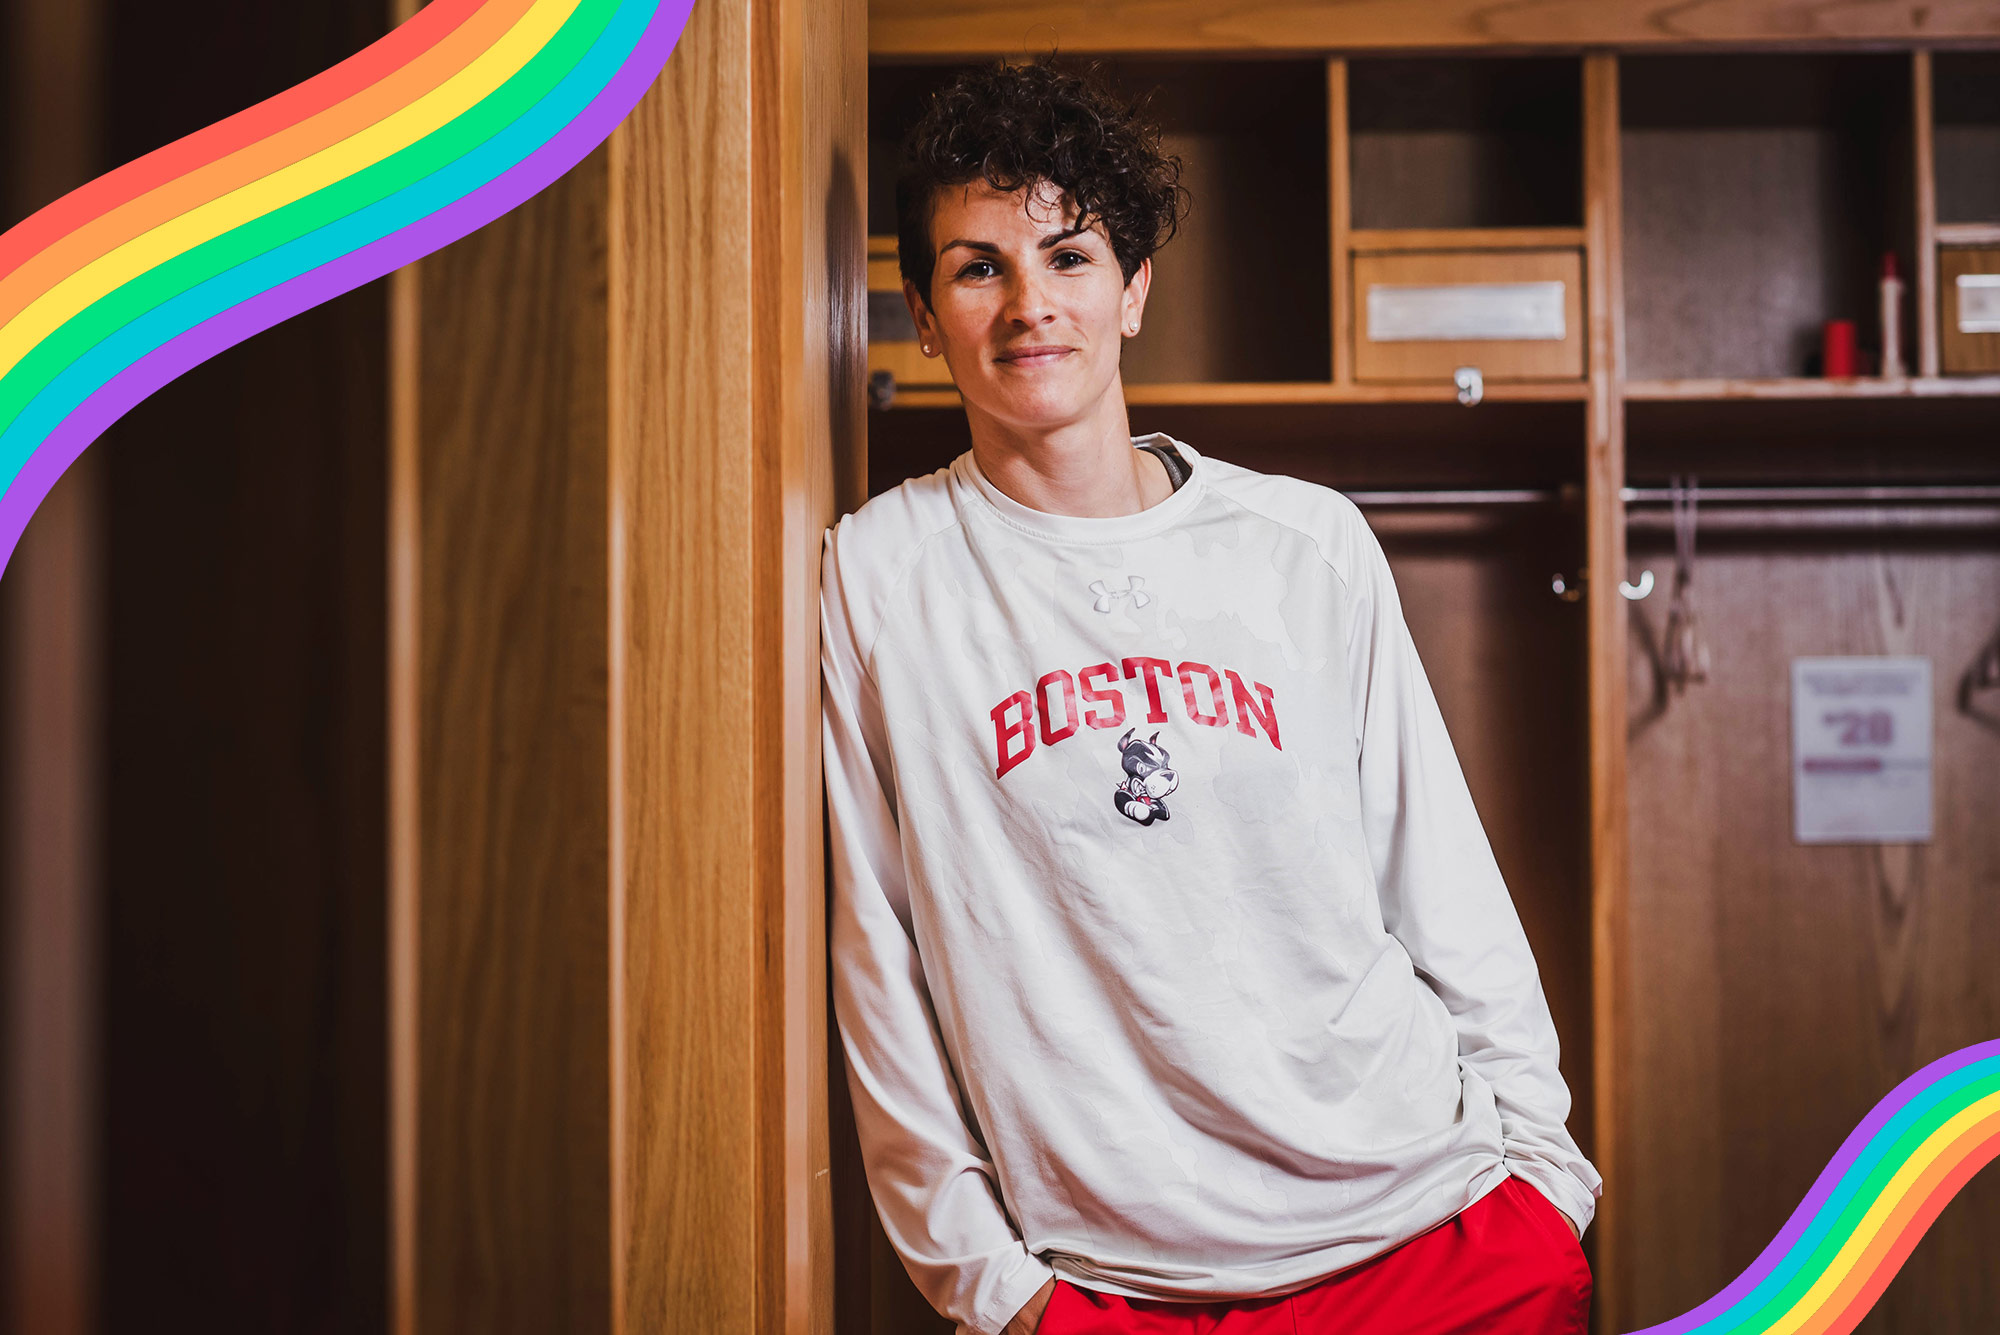 Kelly Lawrence, women’s assistant head soccer coach, poses for a photo on June 19, 2021. She wears a white long sleeve boston university sweatshirt and has her hands in her pockets.